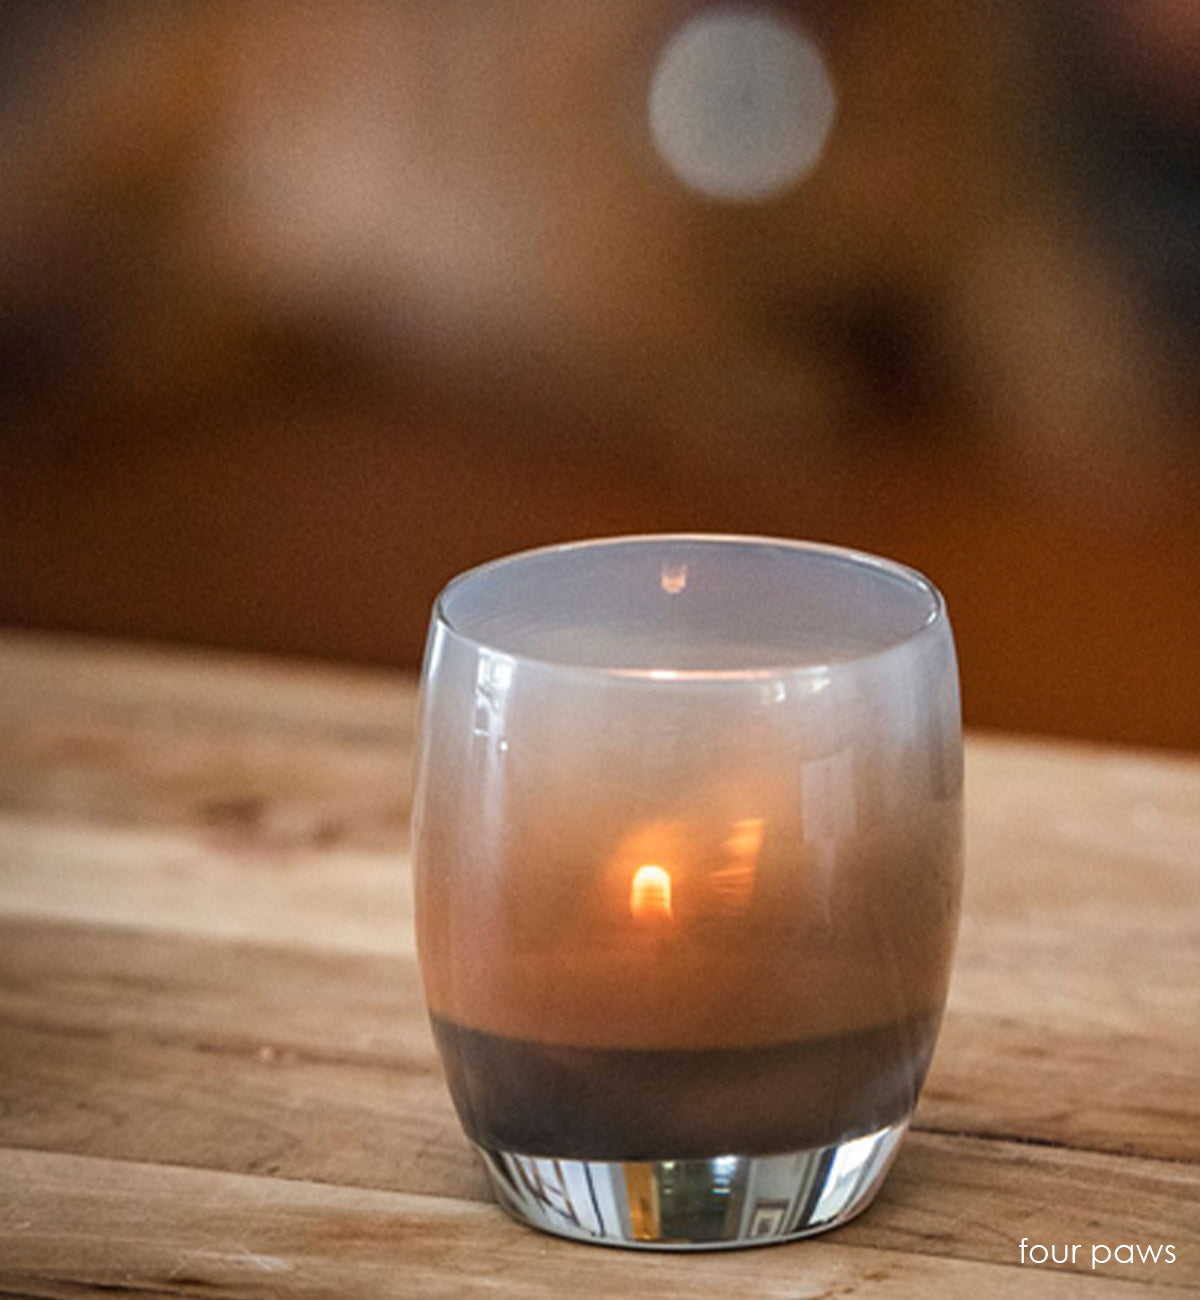 four paws, smokey gray hand-blown glass votive candle holder.